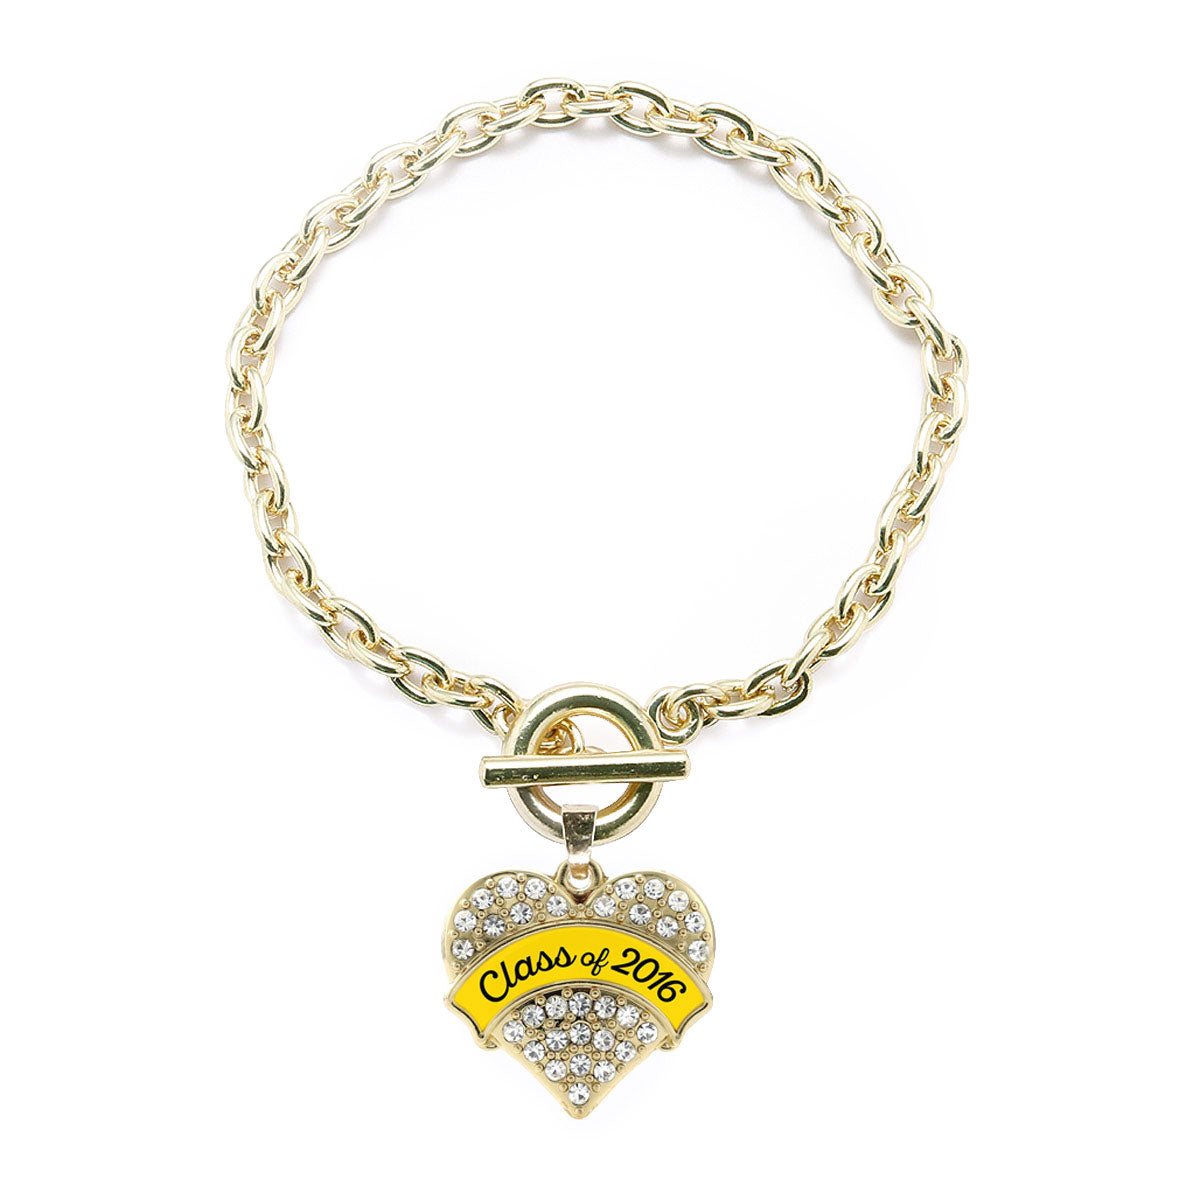 Gold Yellow Class of 2016 Pave Heart Charm Toggle Bracelet